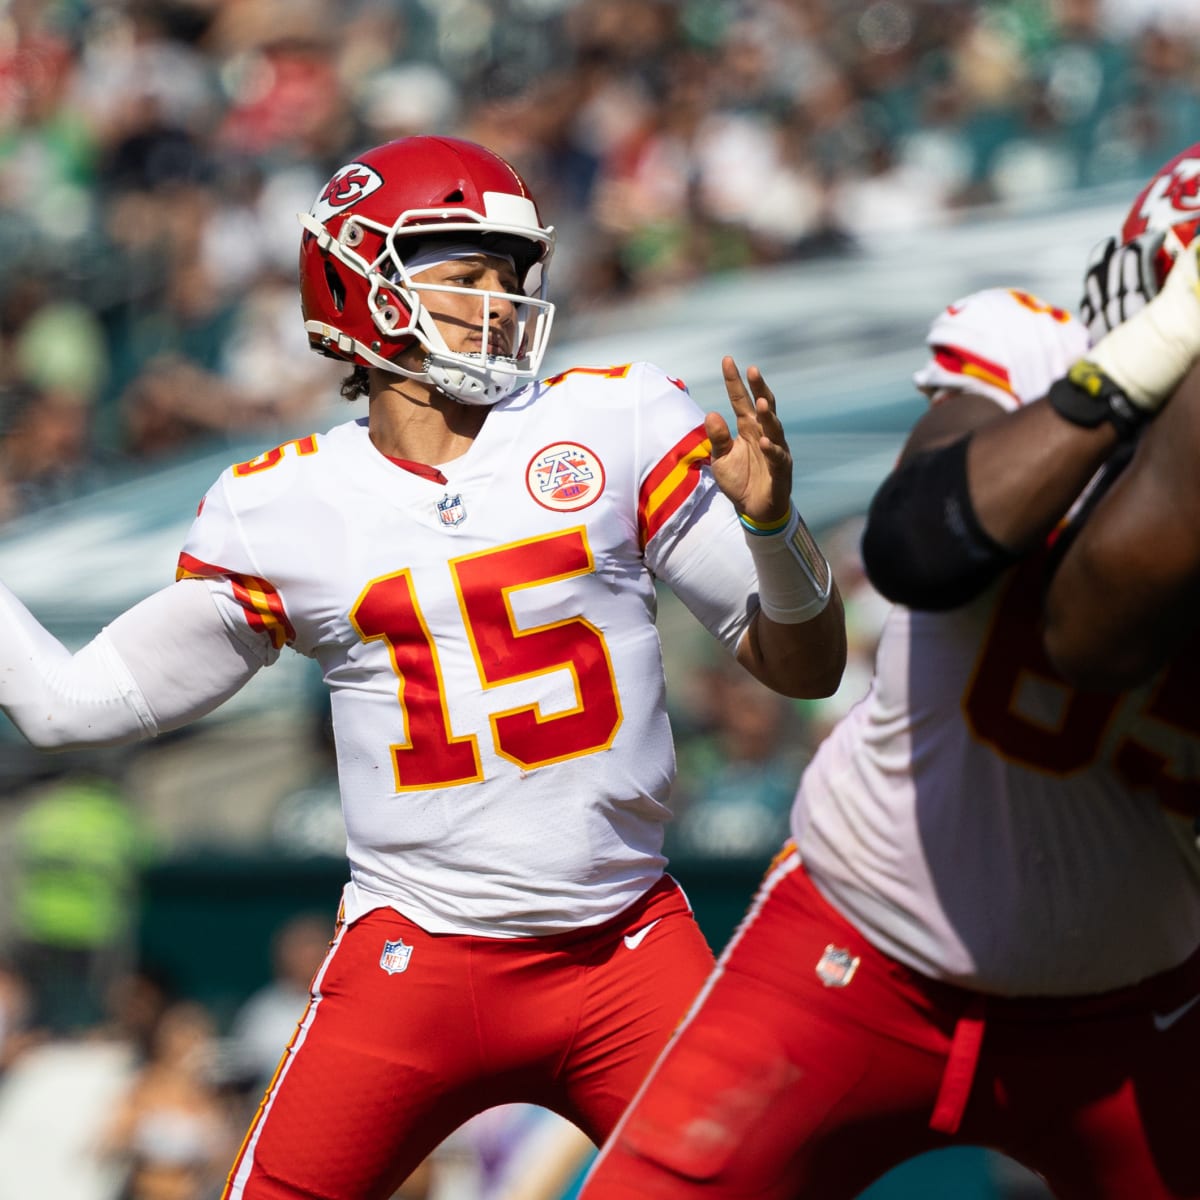 Chiefs vs. Eagles: How to watch, listen and stream